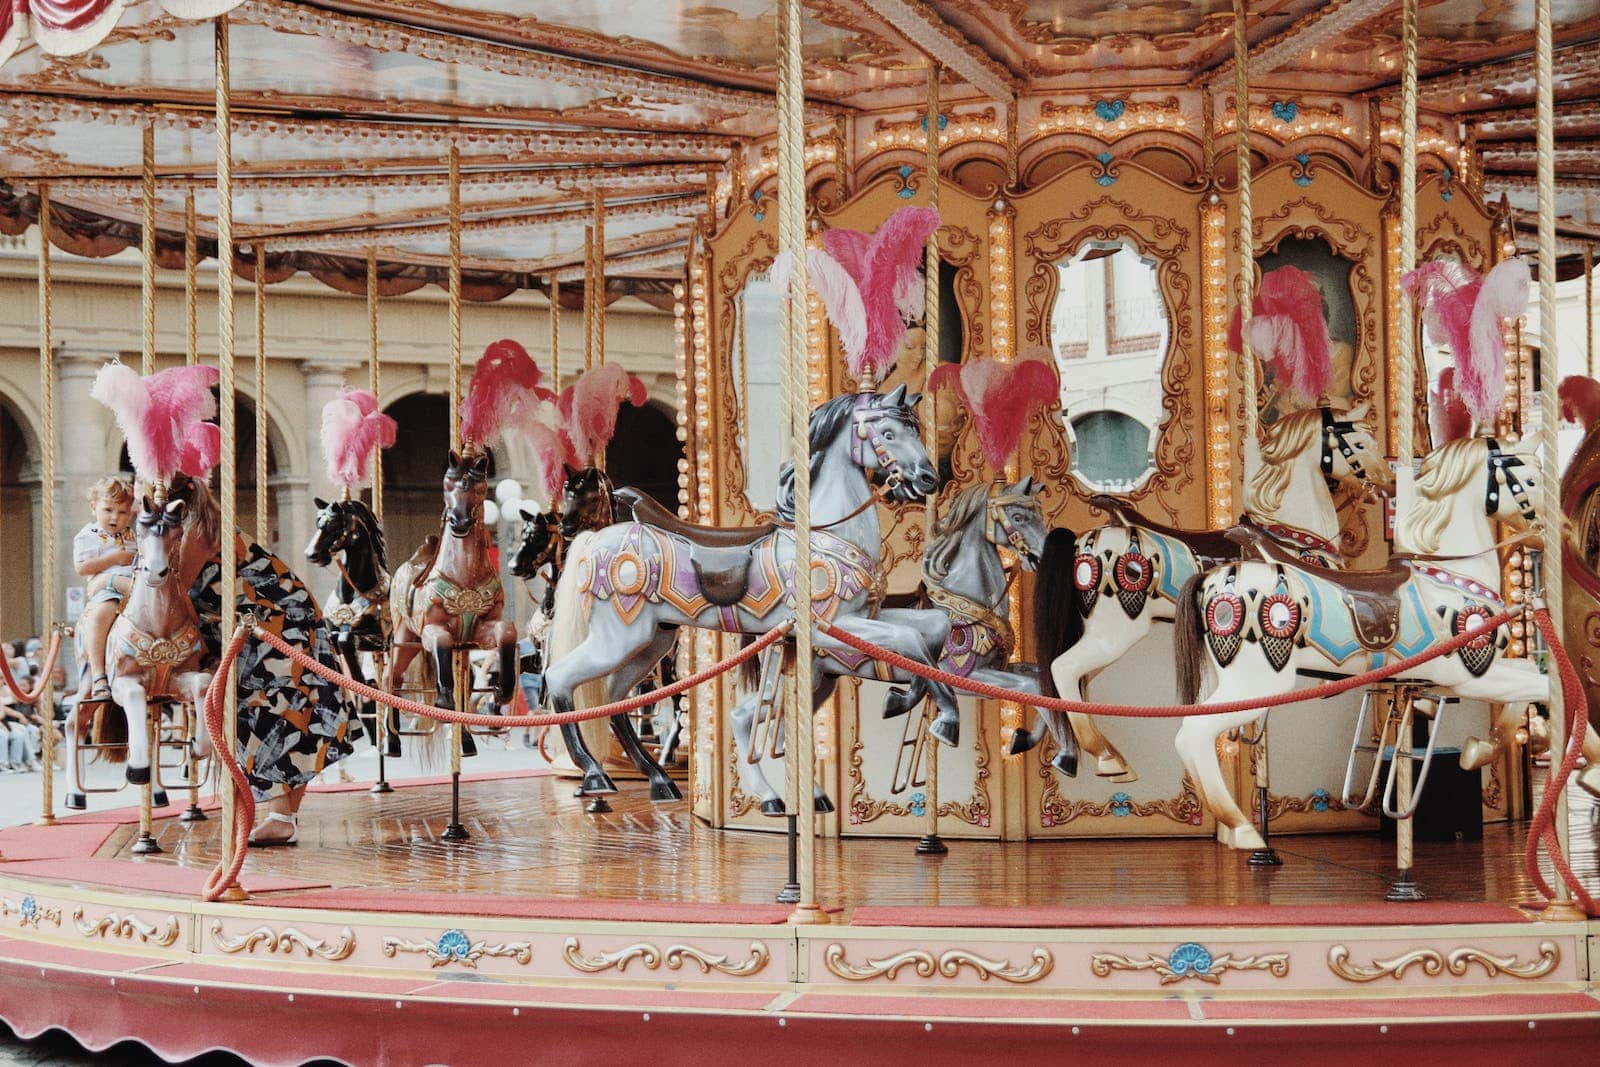 A traditional carousel ride with horses